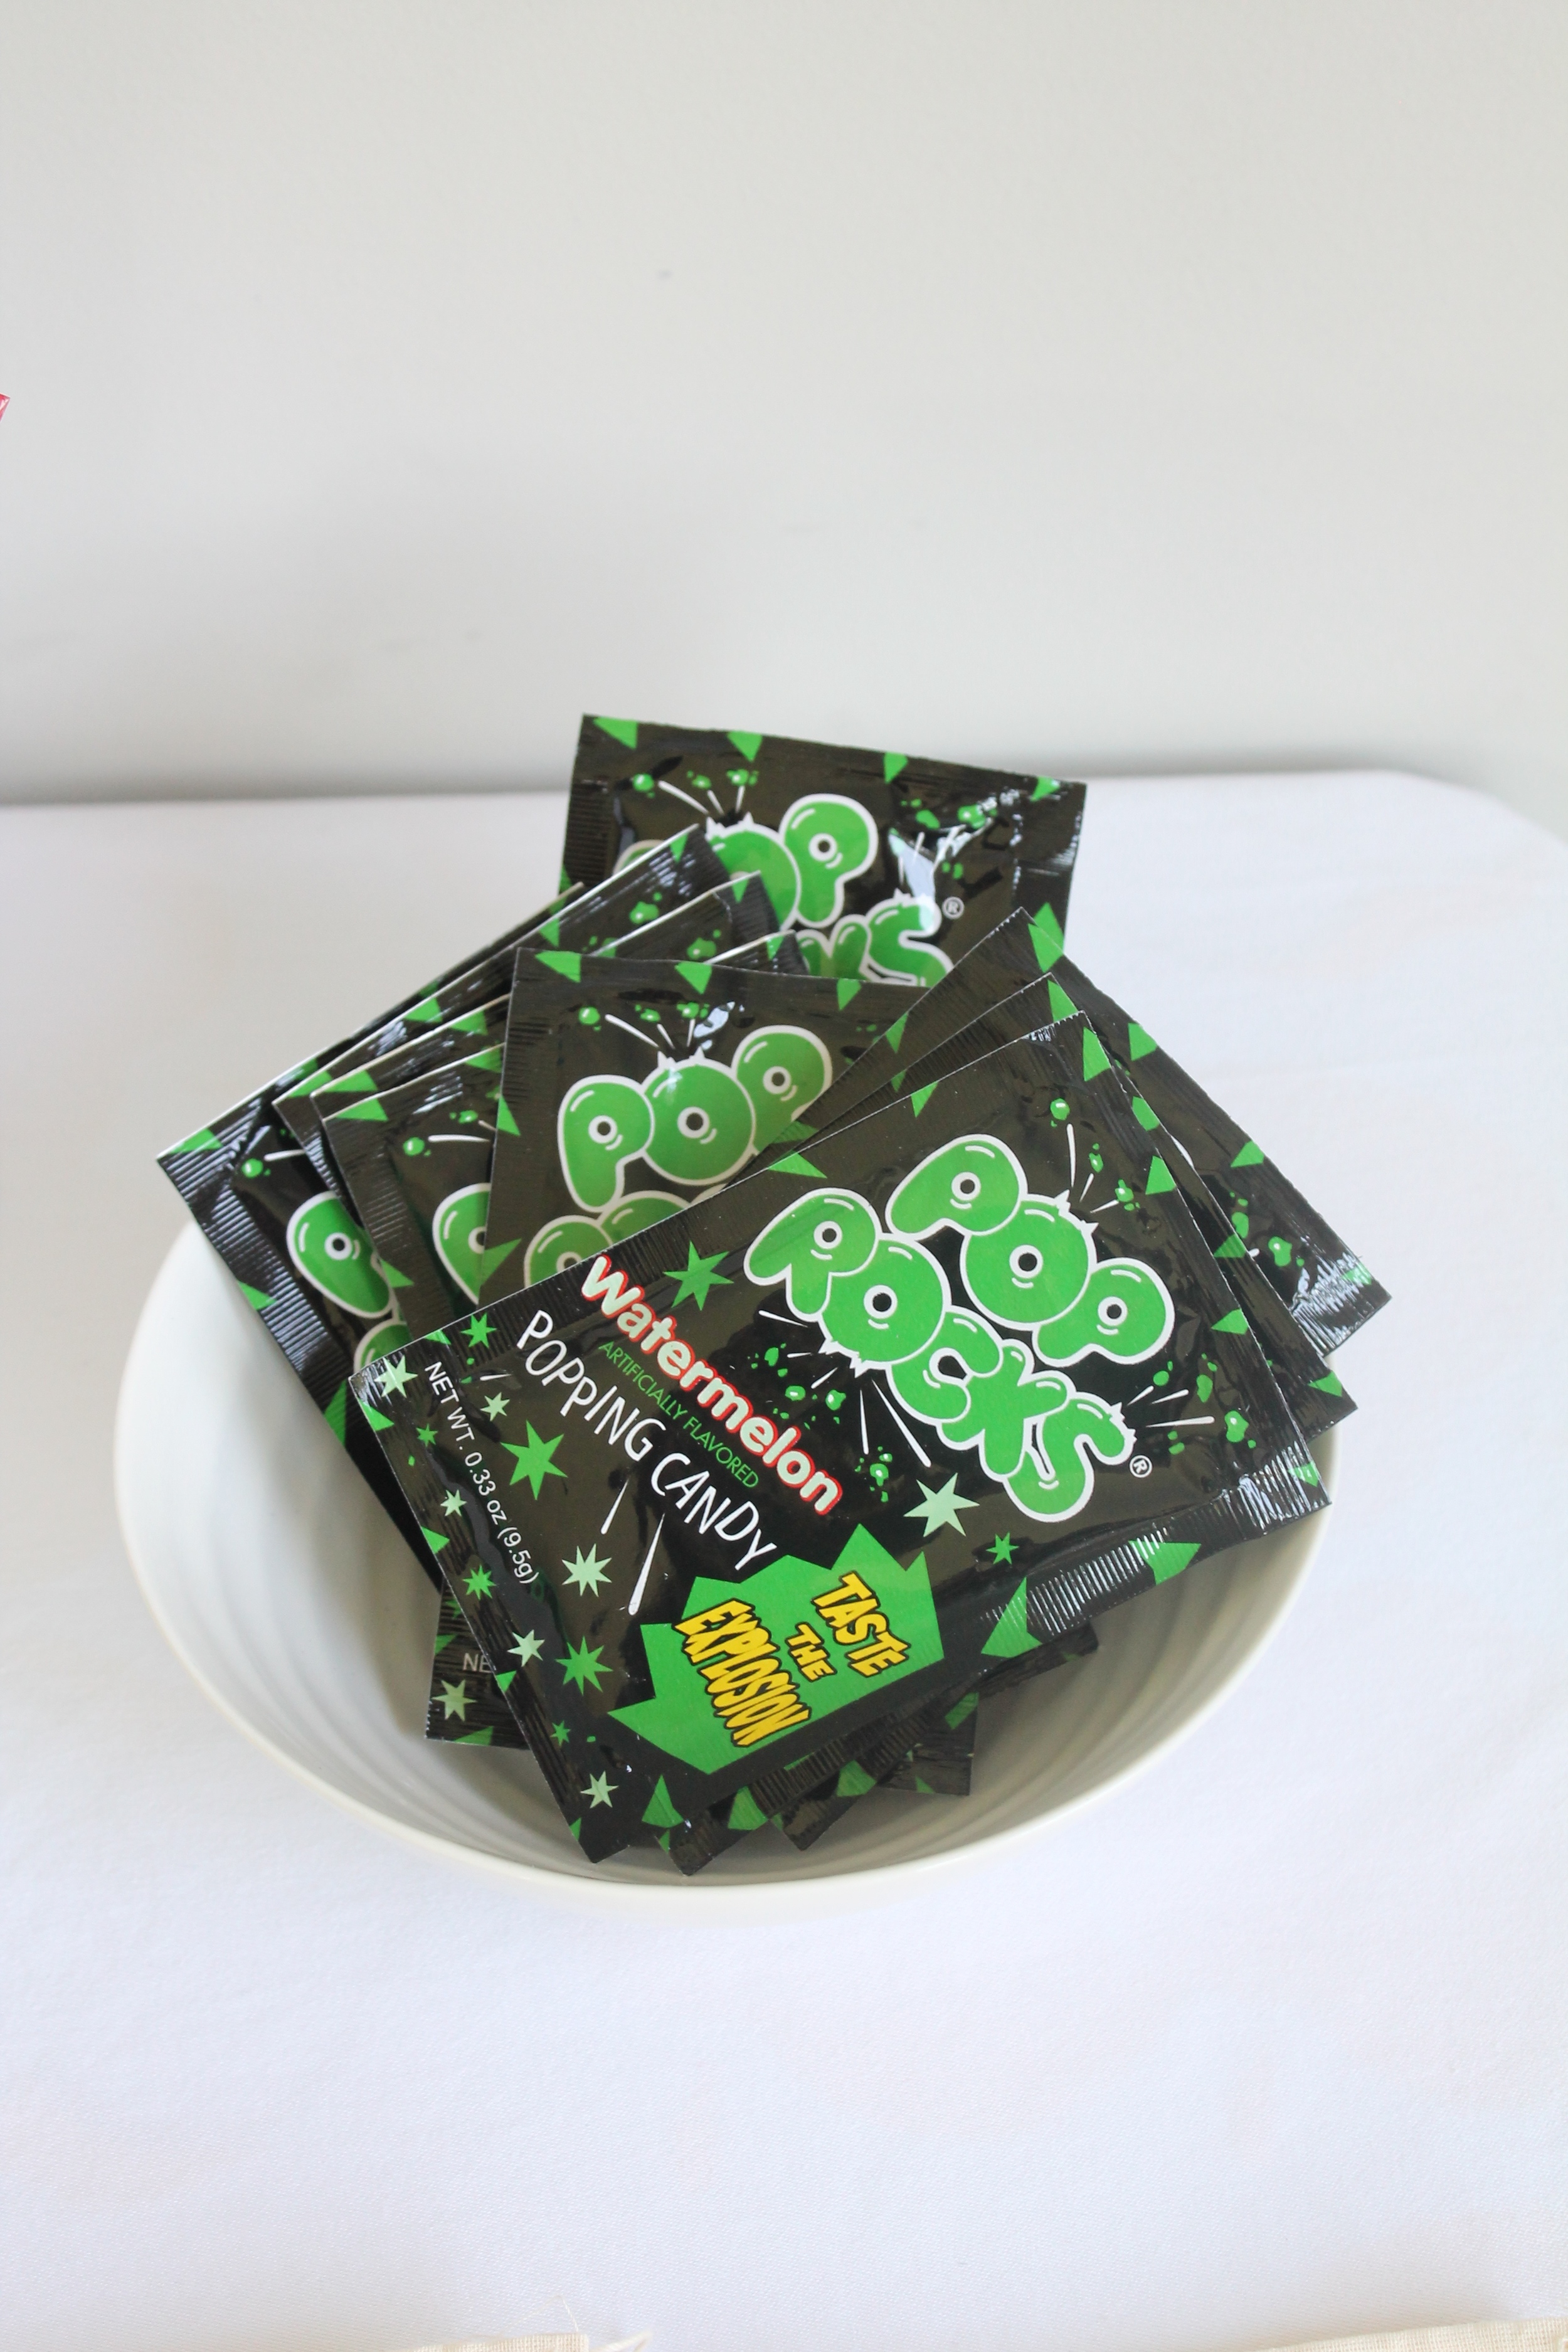 Pop Rocks for a Rock birthday party.